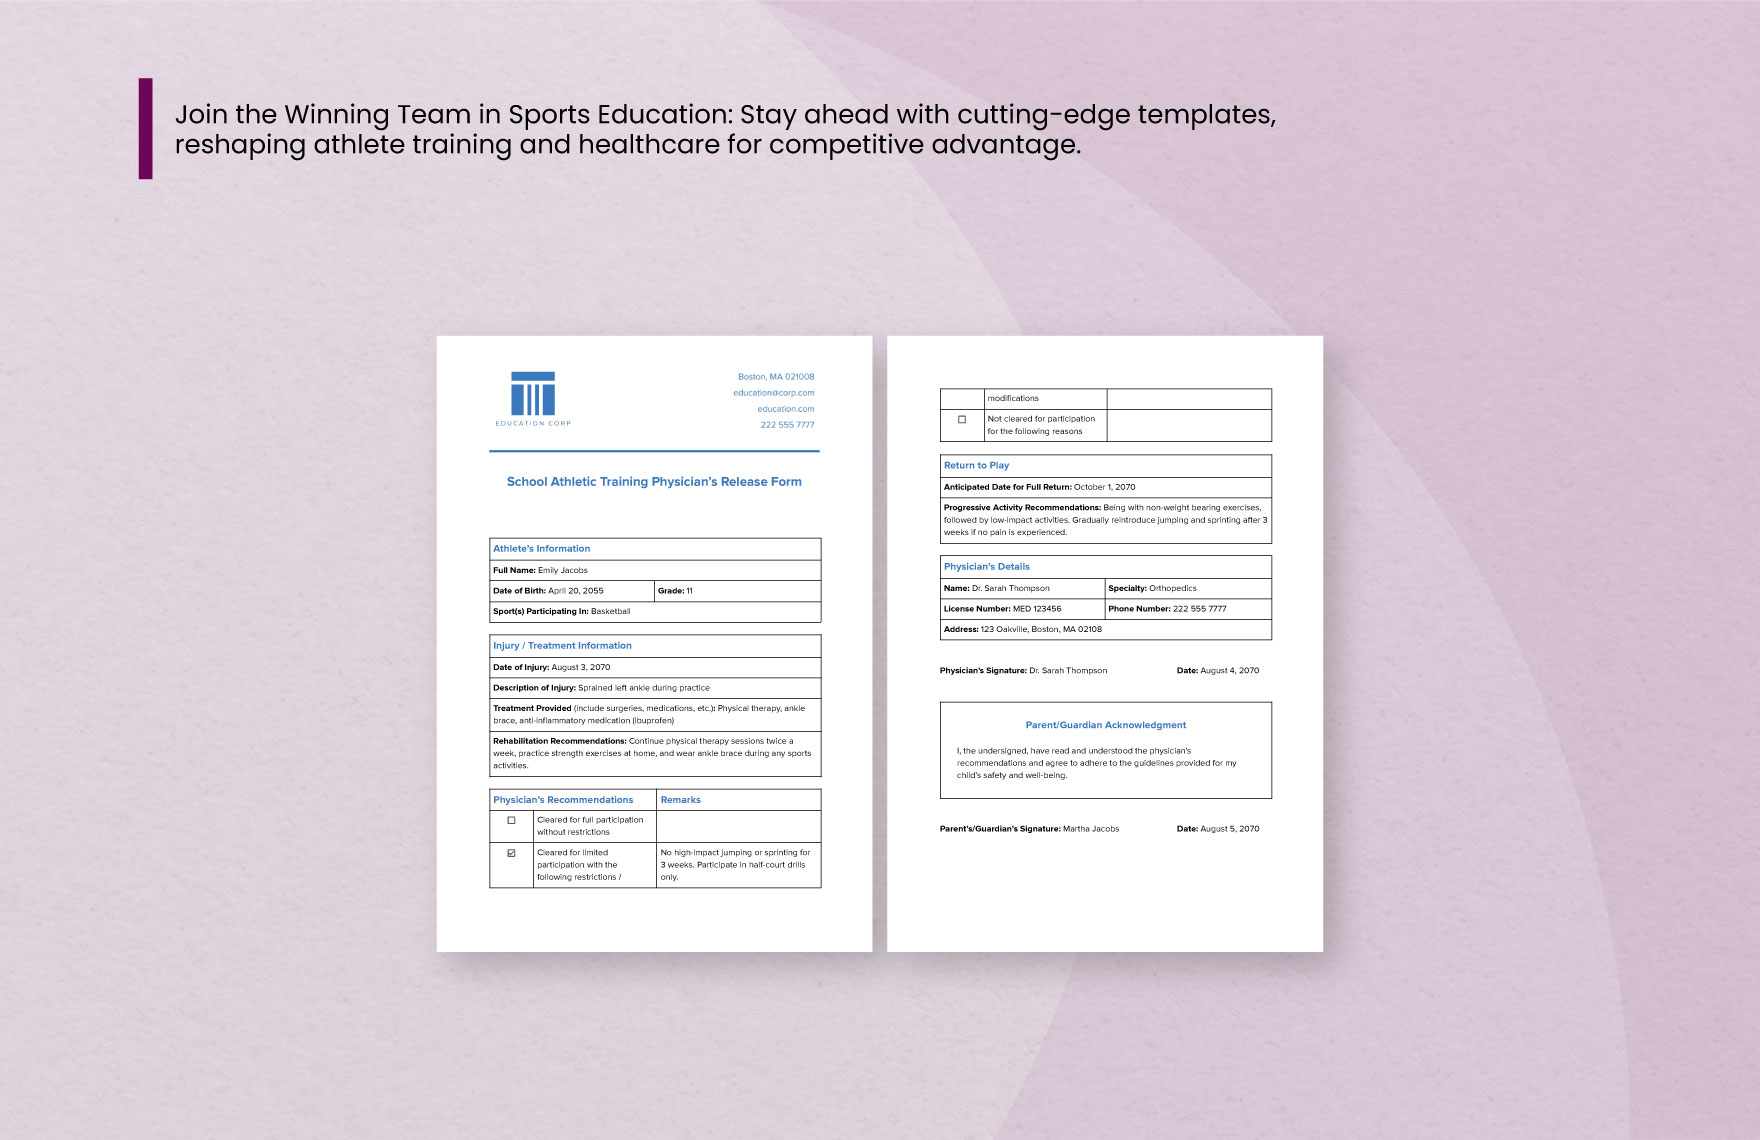 School Athletic Training Physician's Release Form Template